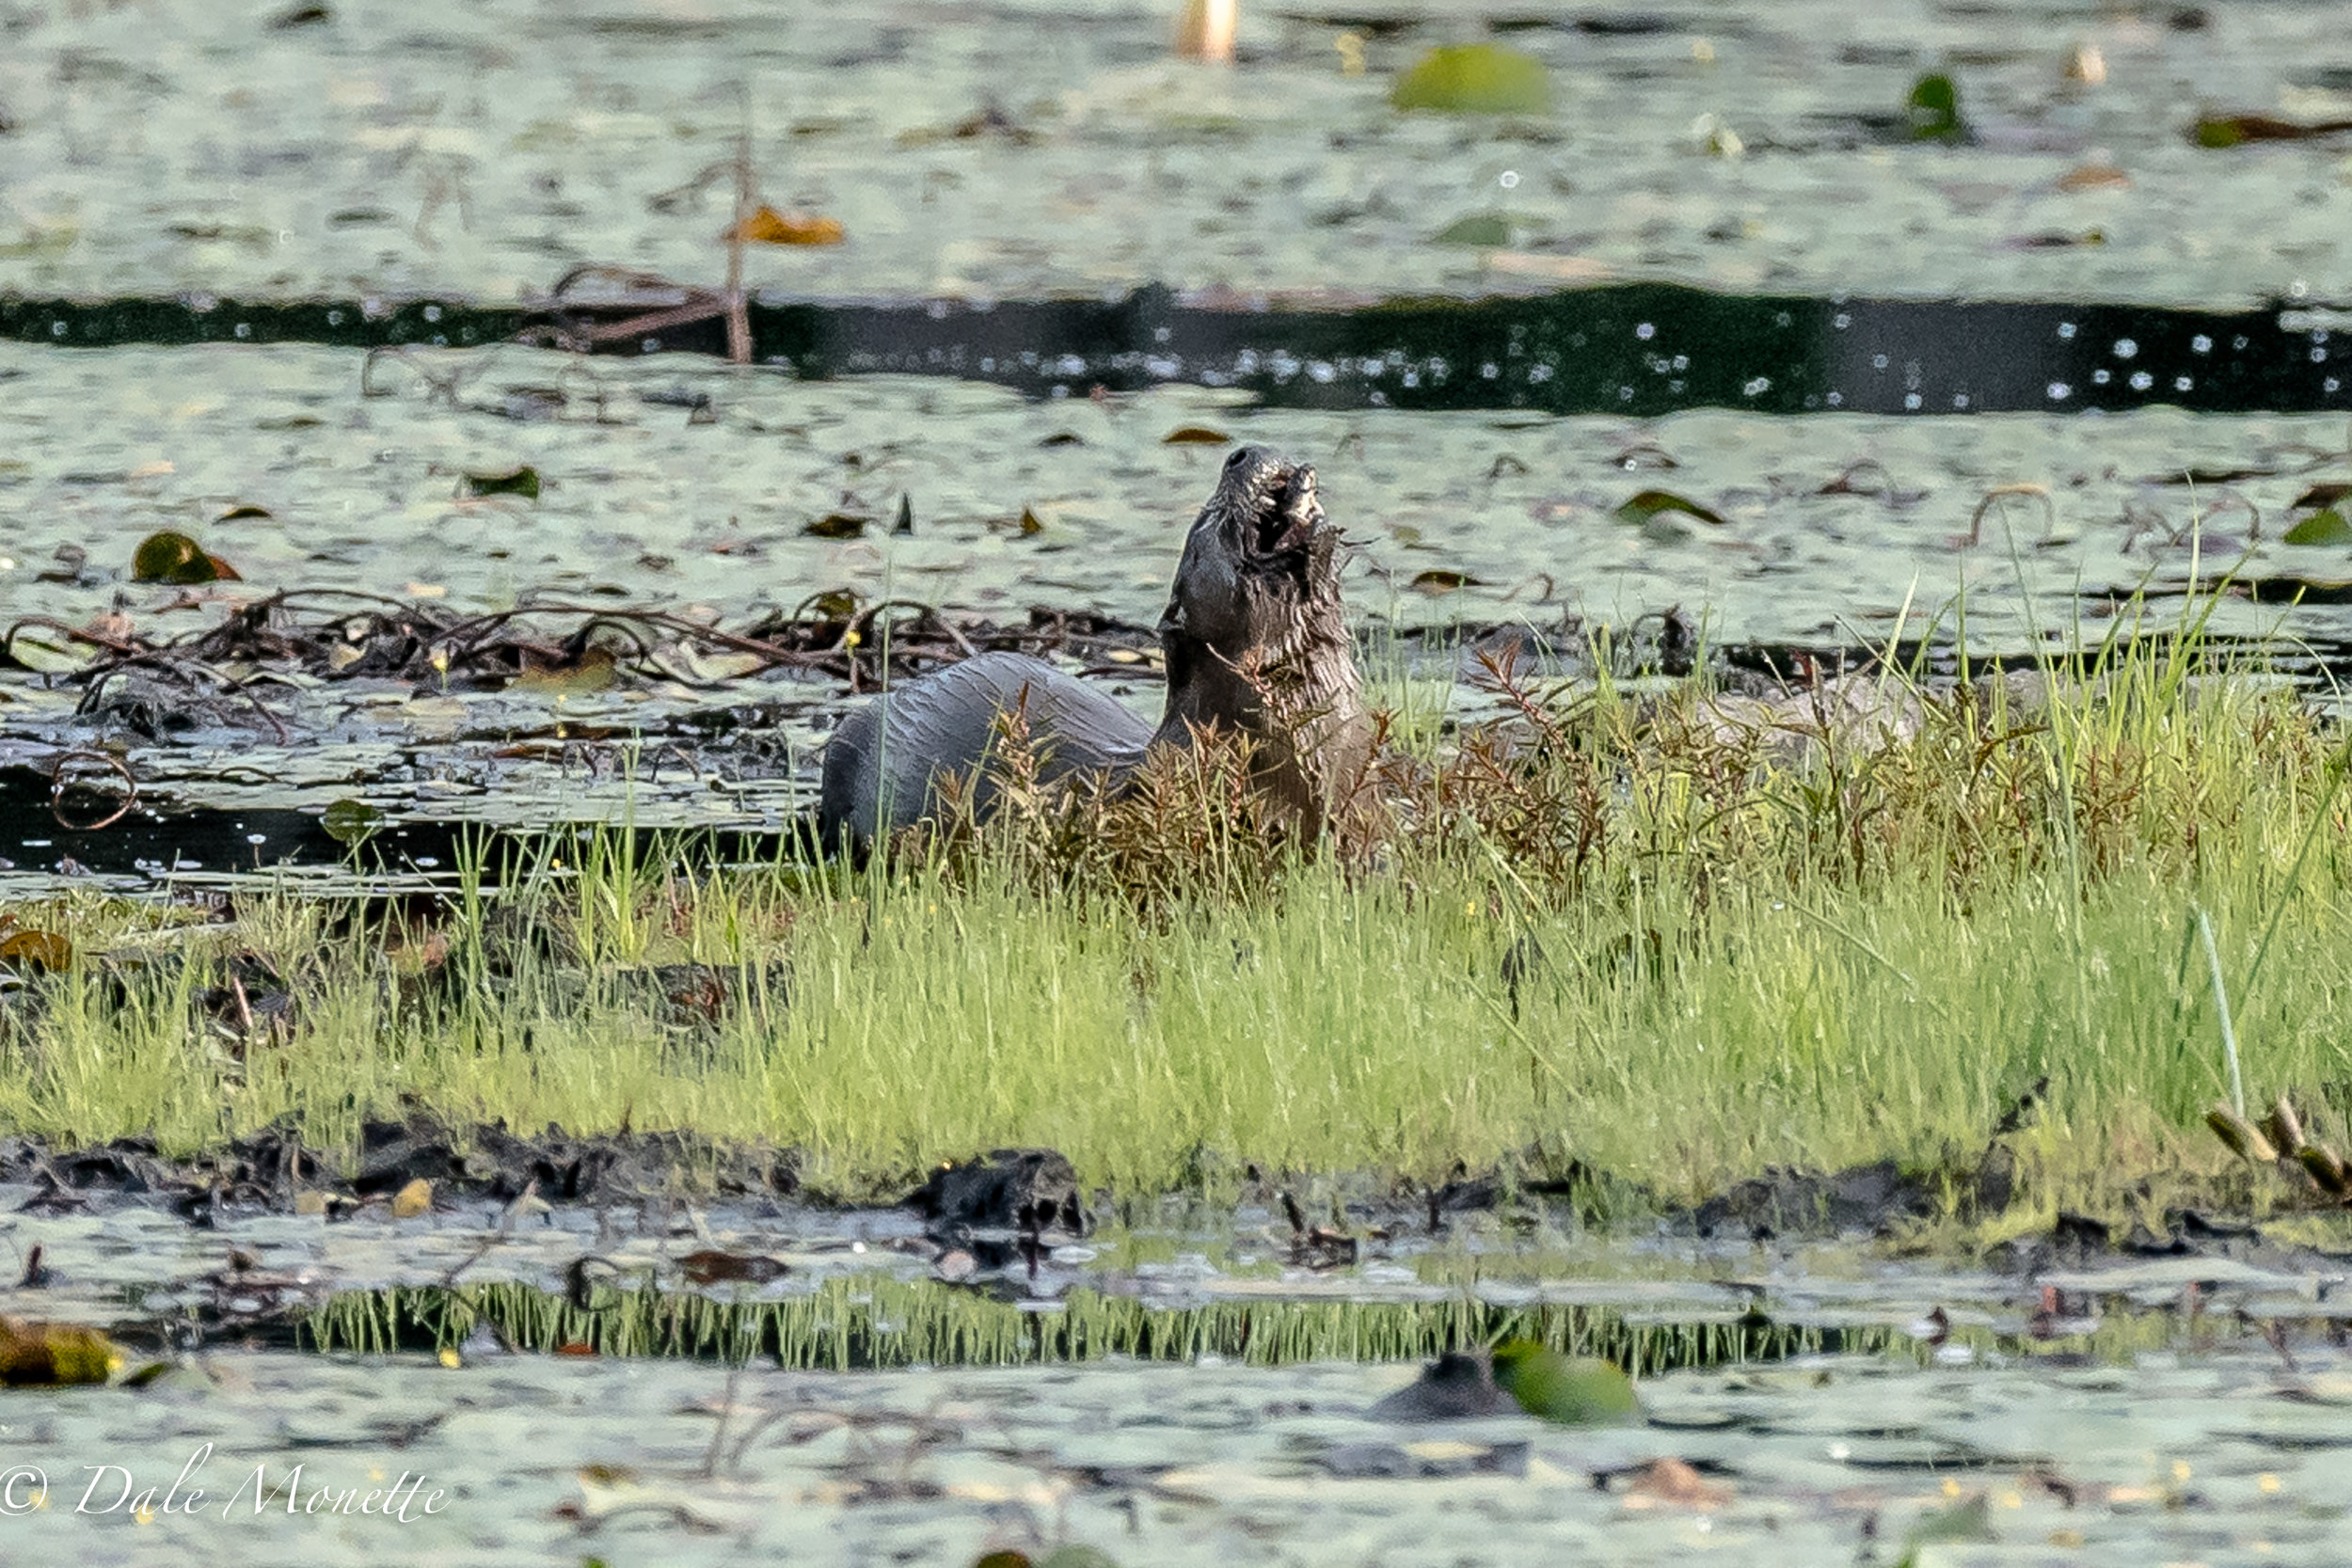   A northern river otter snacks on his mid morning fish. &nbsp;Looks deee-lish huh ? &nbsp;:) &nbsp;8/3/16  